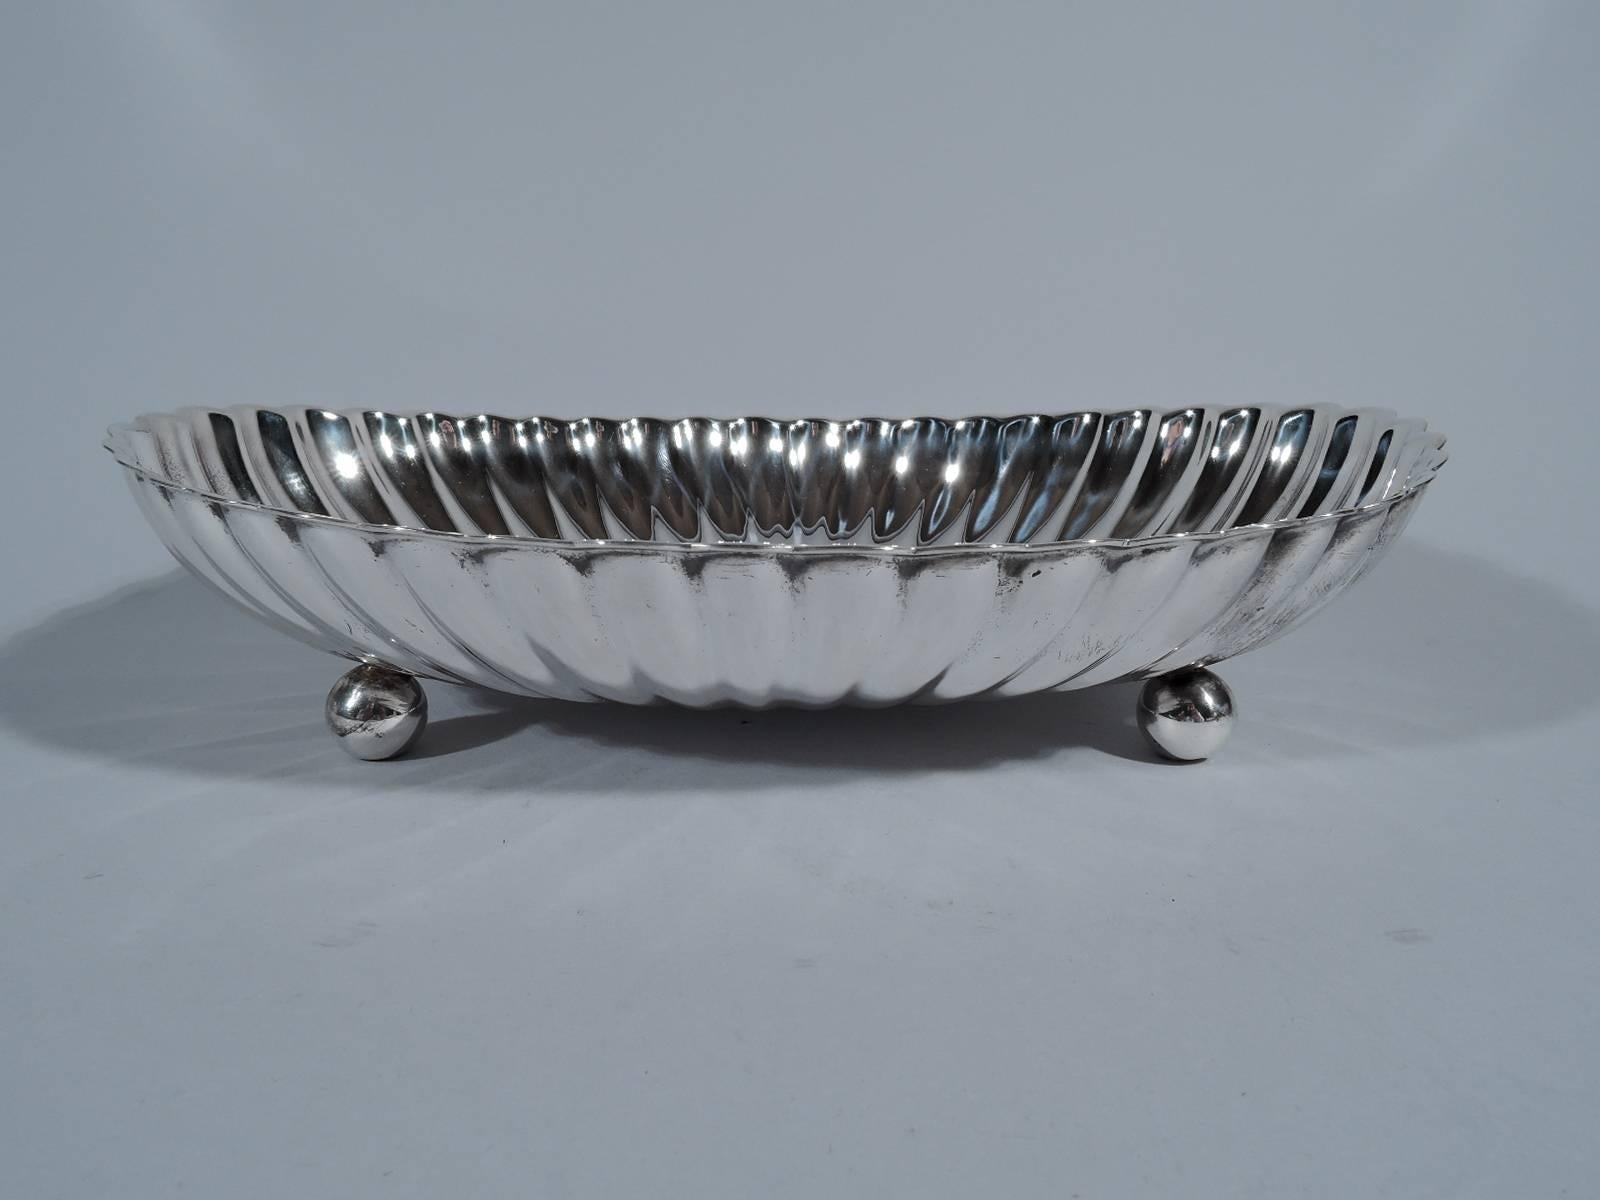 Sterling silver bowl in Leamington pattern. Made by Gorham in Providence, circa 1940. Oval with concentric lobing. Rests on four balls. Hallmark includes pattern name and no. 42603. Heavy weight: 15 troy ounces.